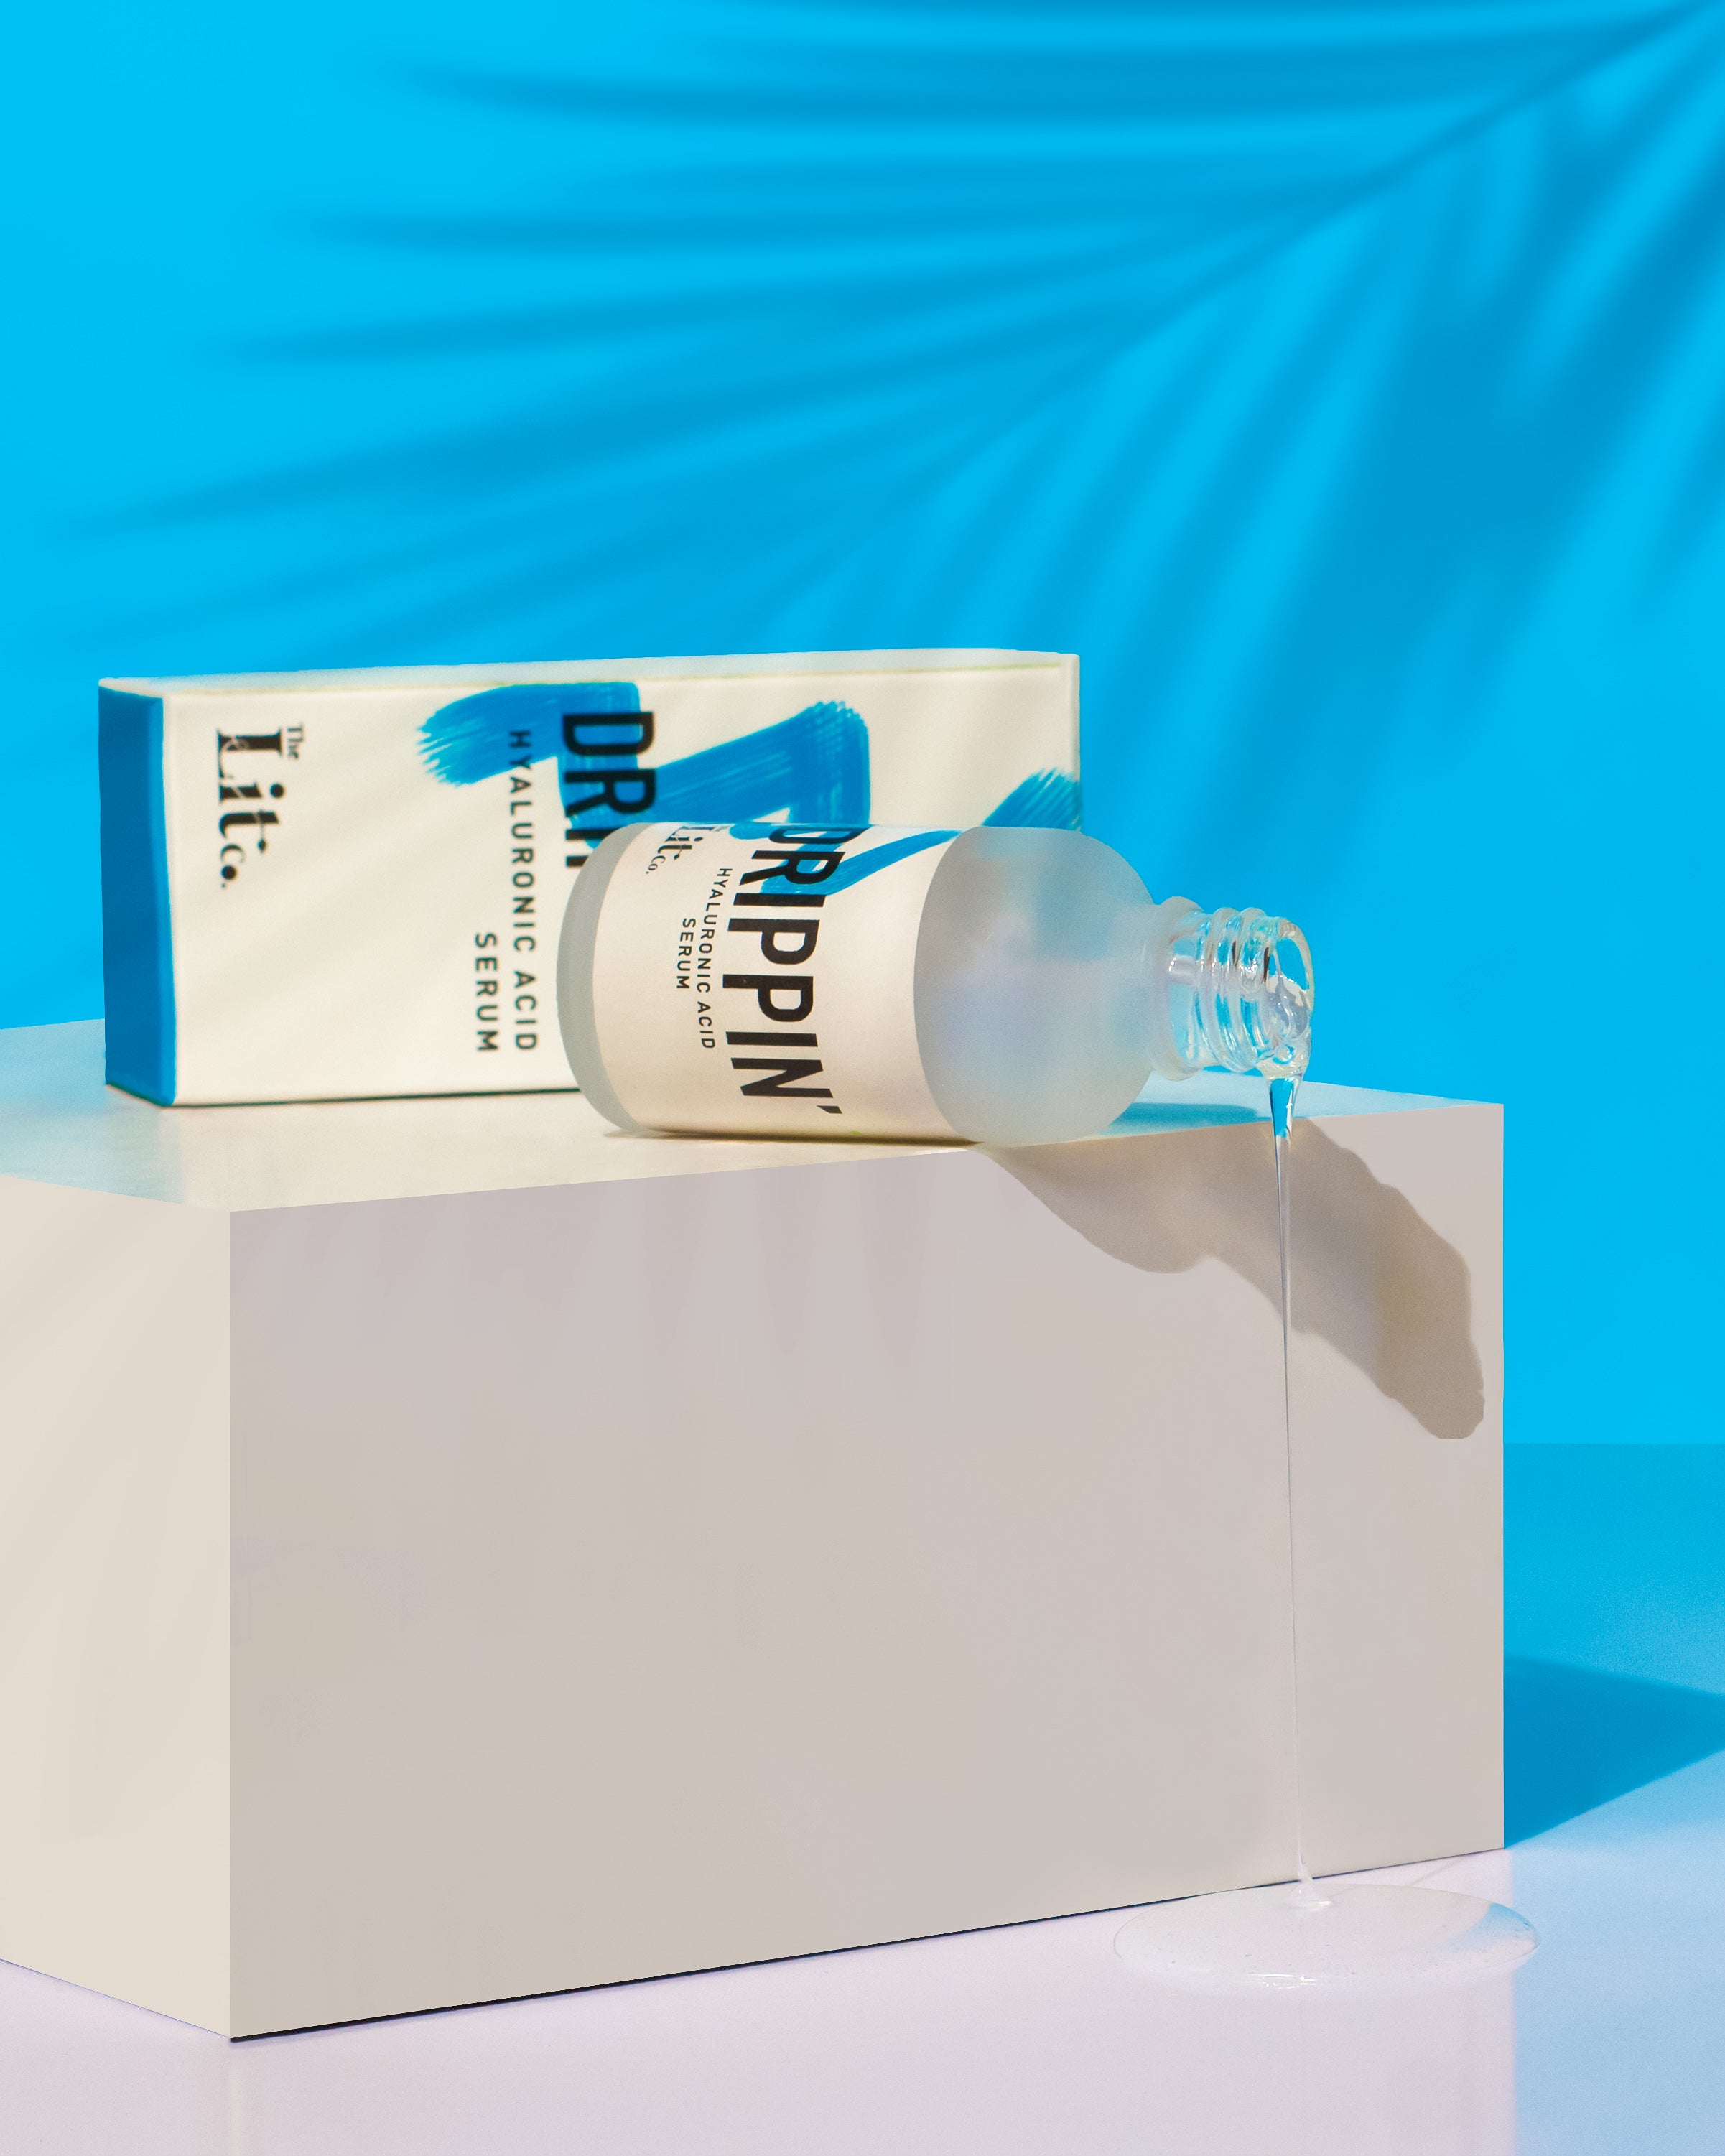 DRIPPIN' (Hyaluronic Acid Serum) - The Lit Co